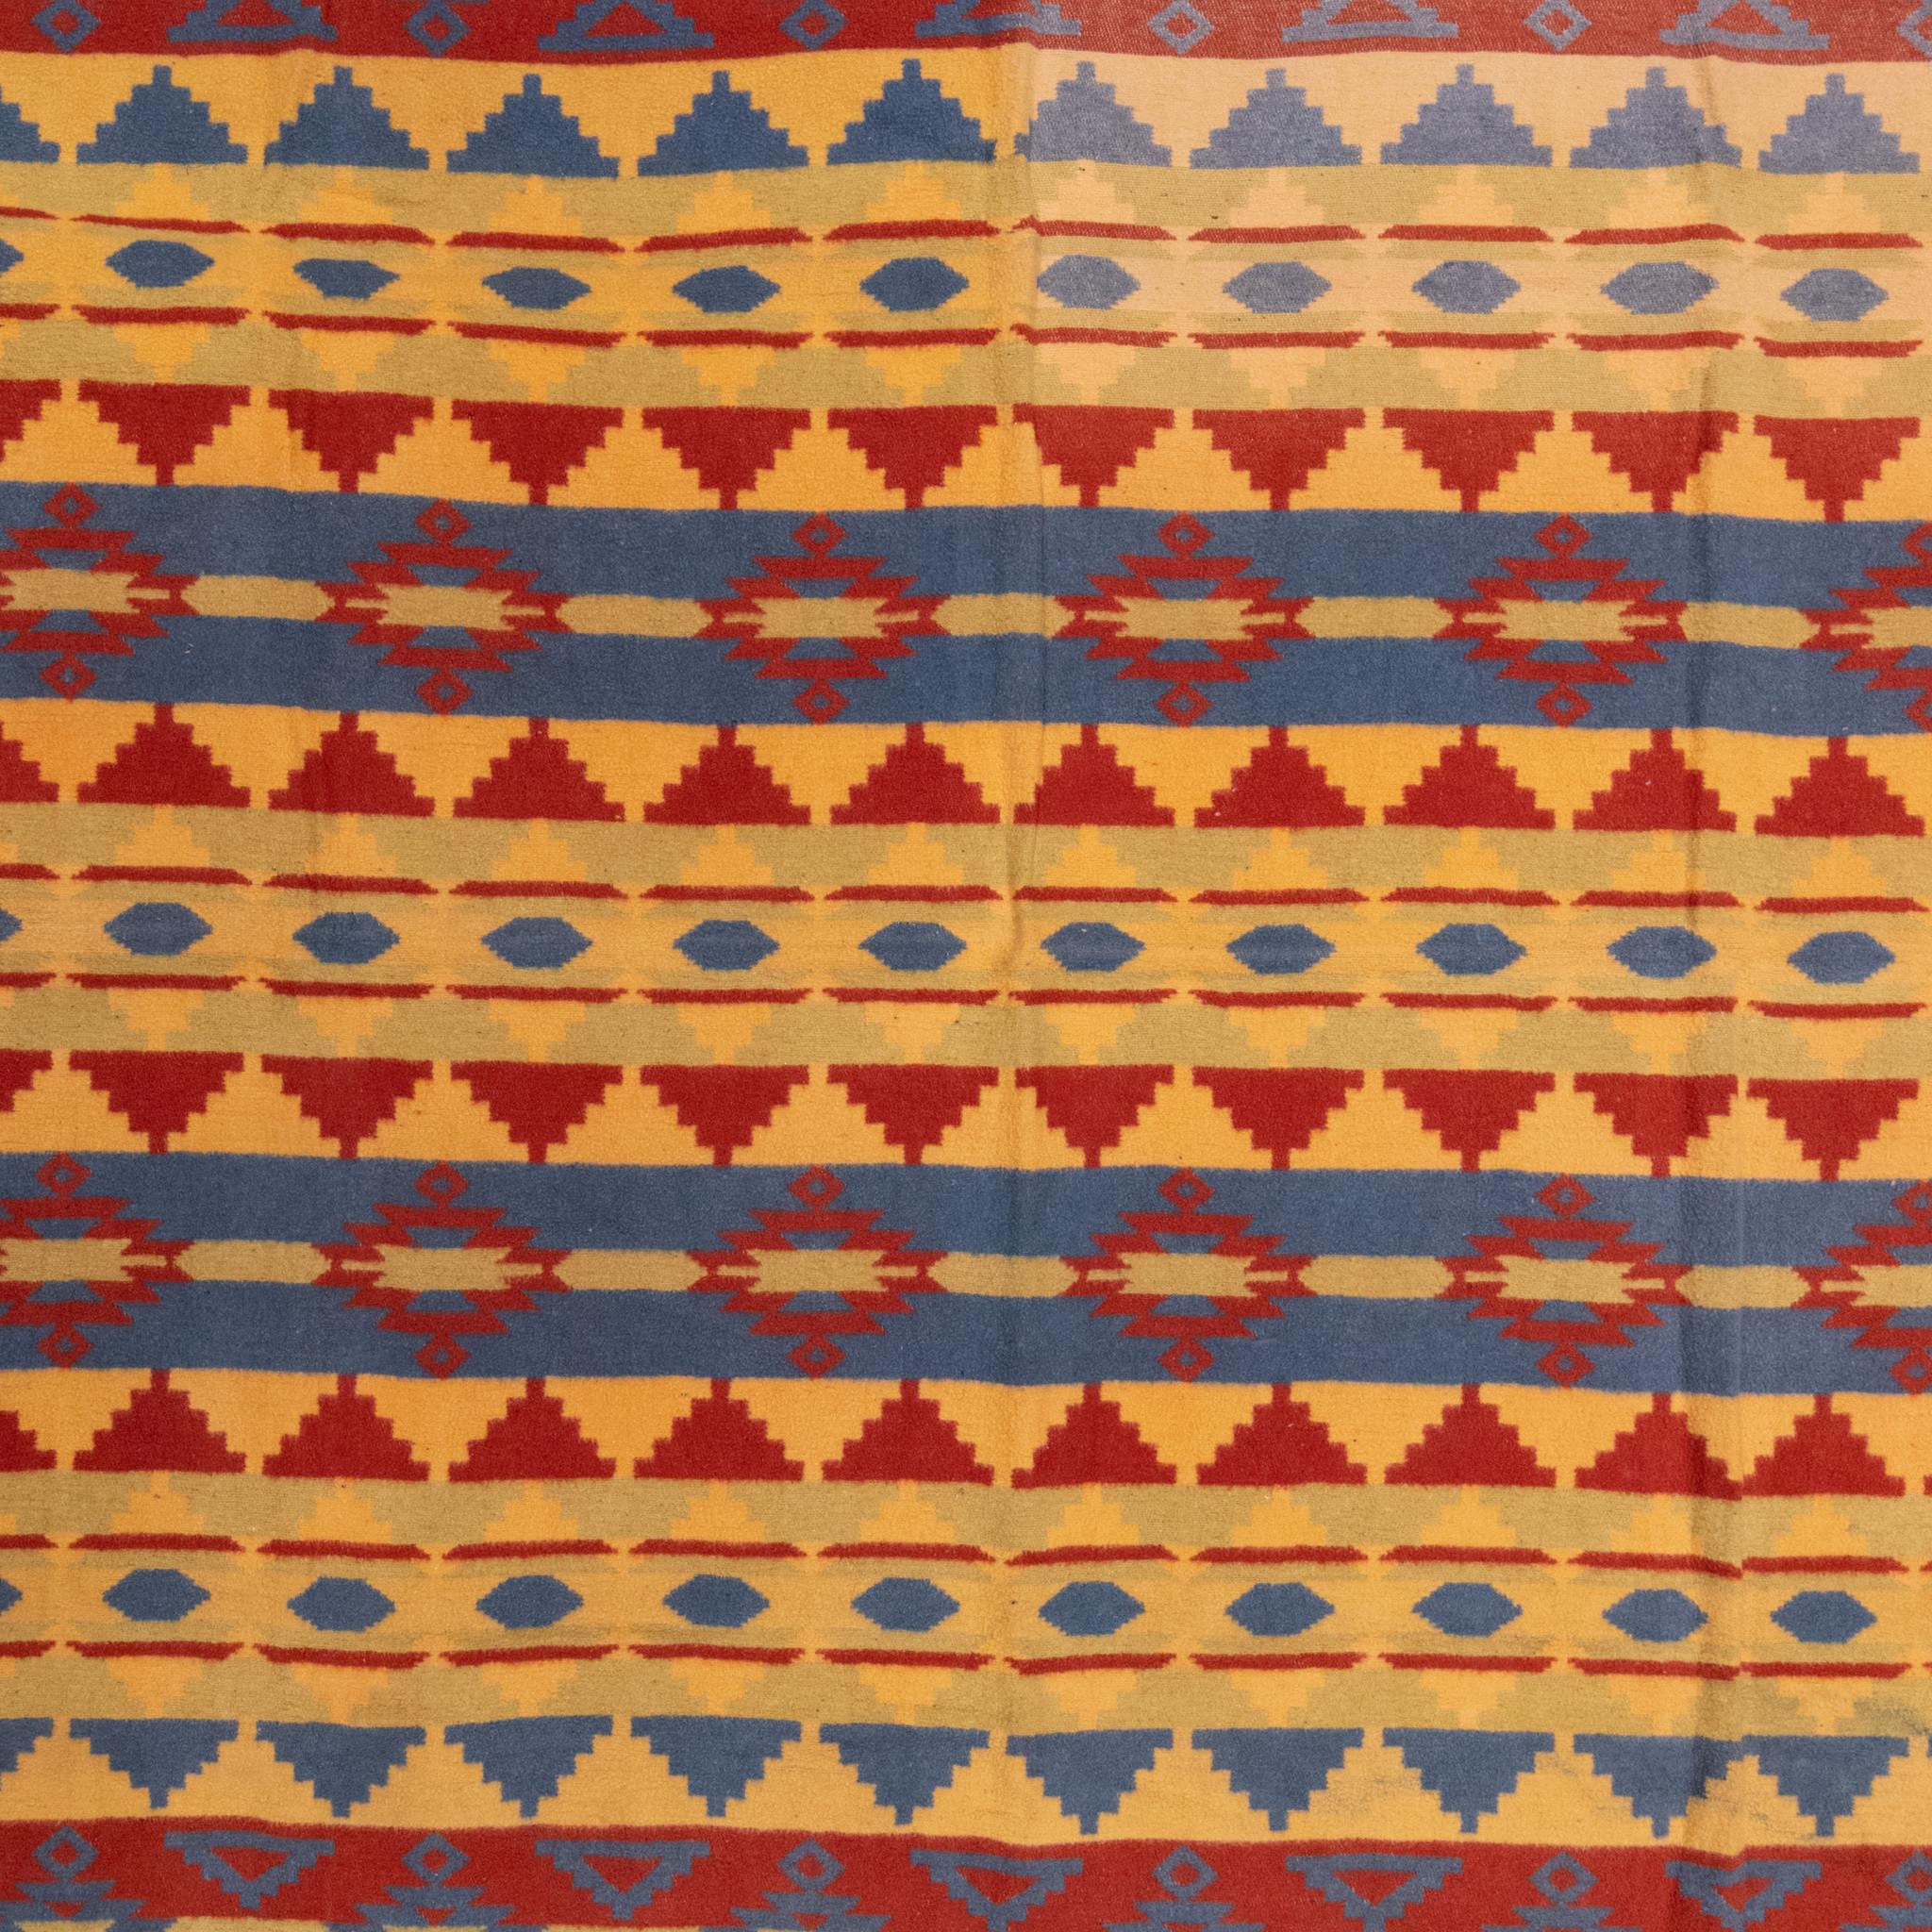 Two sided cotton beacon blanket with geometric designs. Good condition, slight fade one corner not distracting.

Period: circa 1920
Origin: Beacon
Size: 64